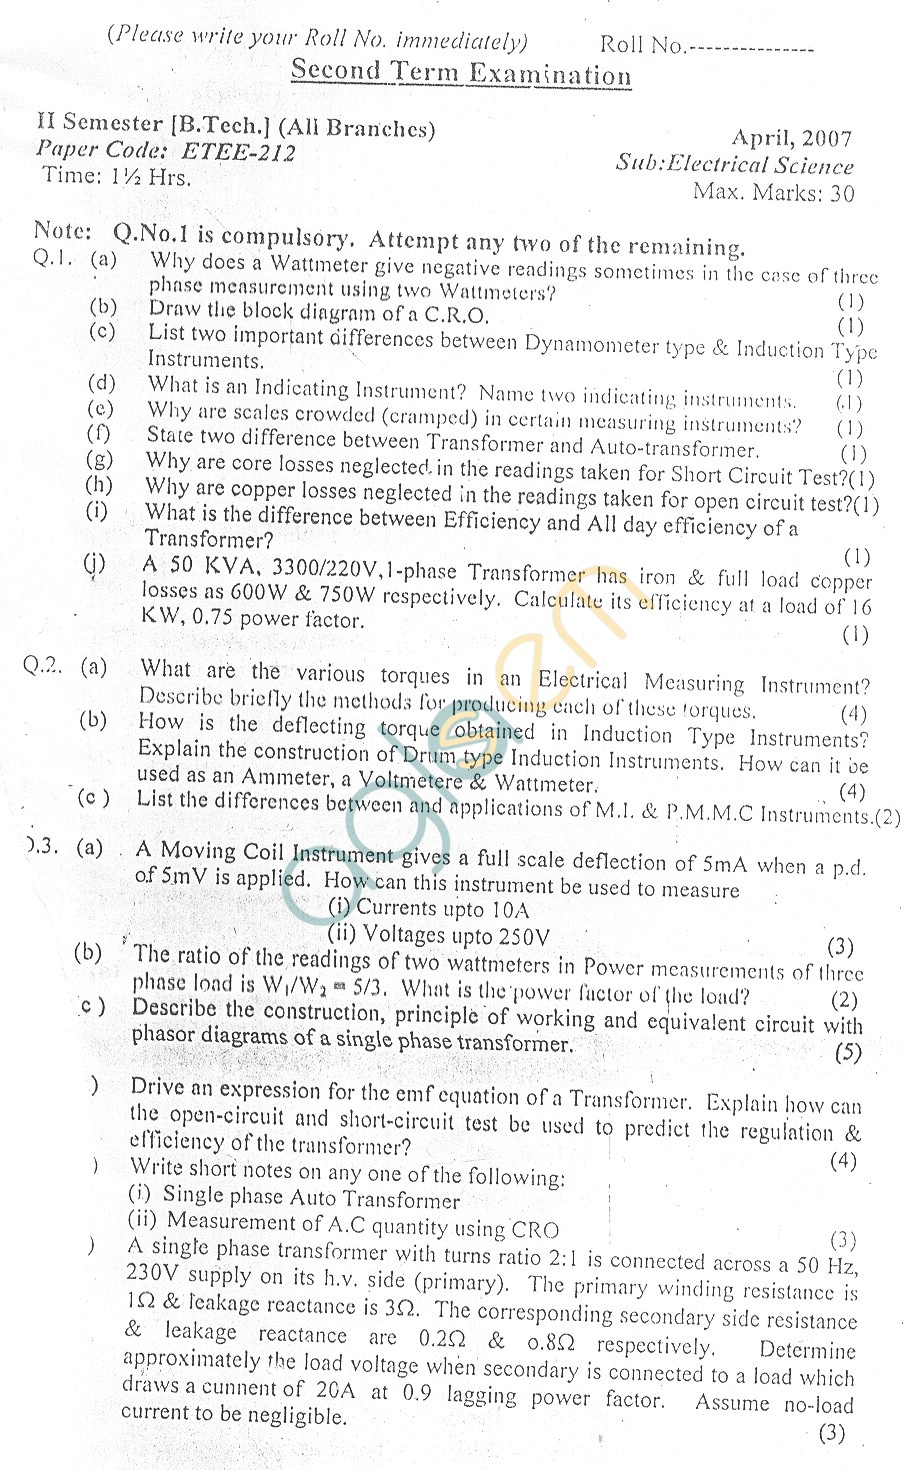 GGSIPU Question Papers Second Semester  Second Term 2007  ETEE-212